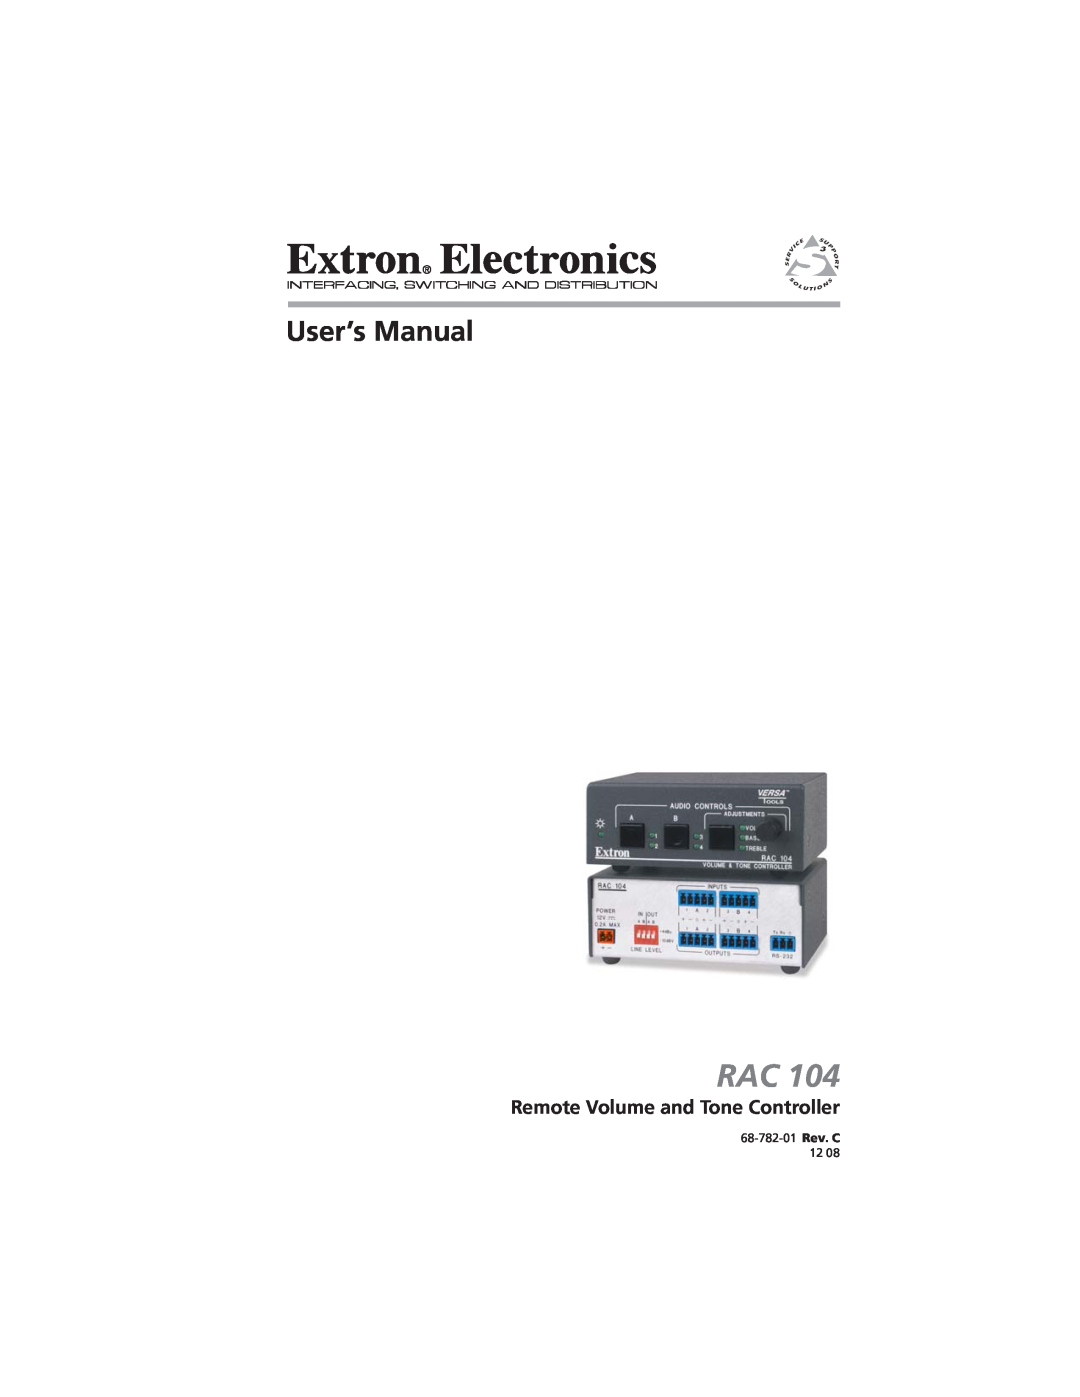 Extron electronic RAC 104 user manual Remote Volume and Tone Controller, 68-782-01 Rev. C 